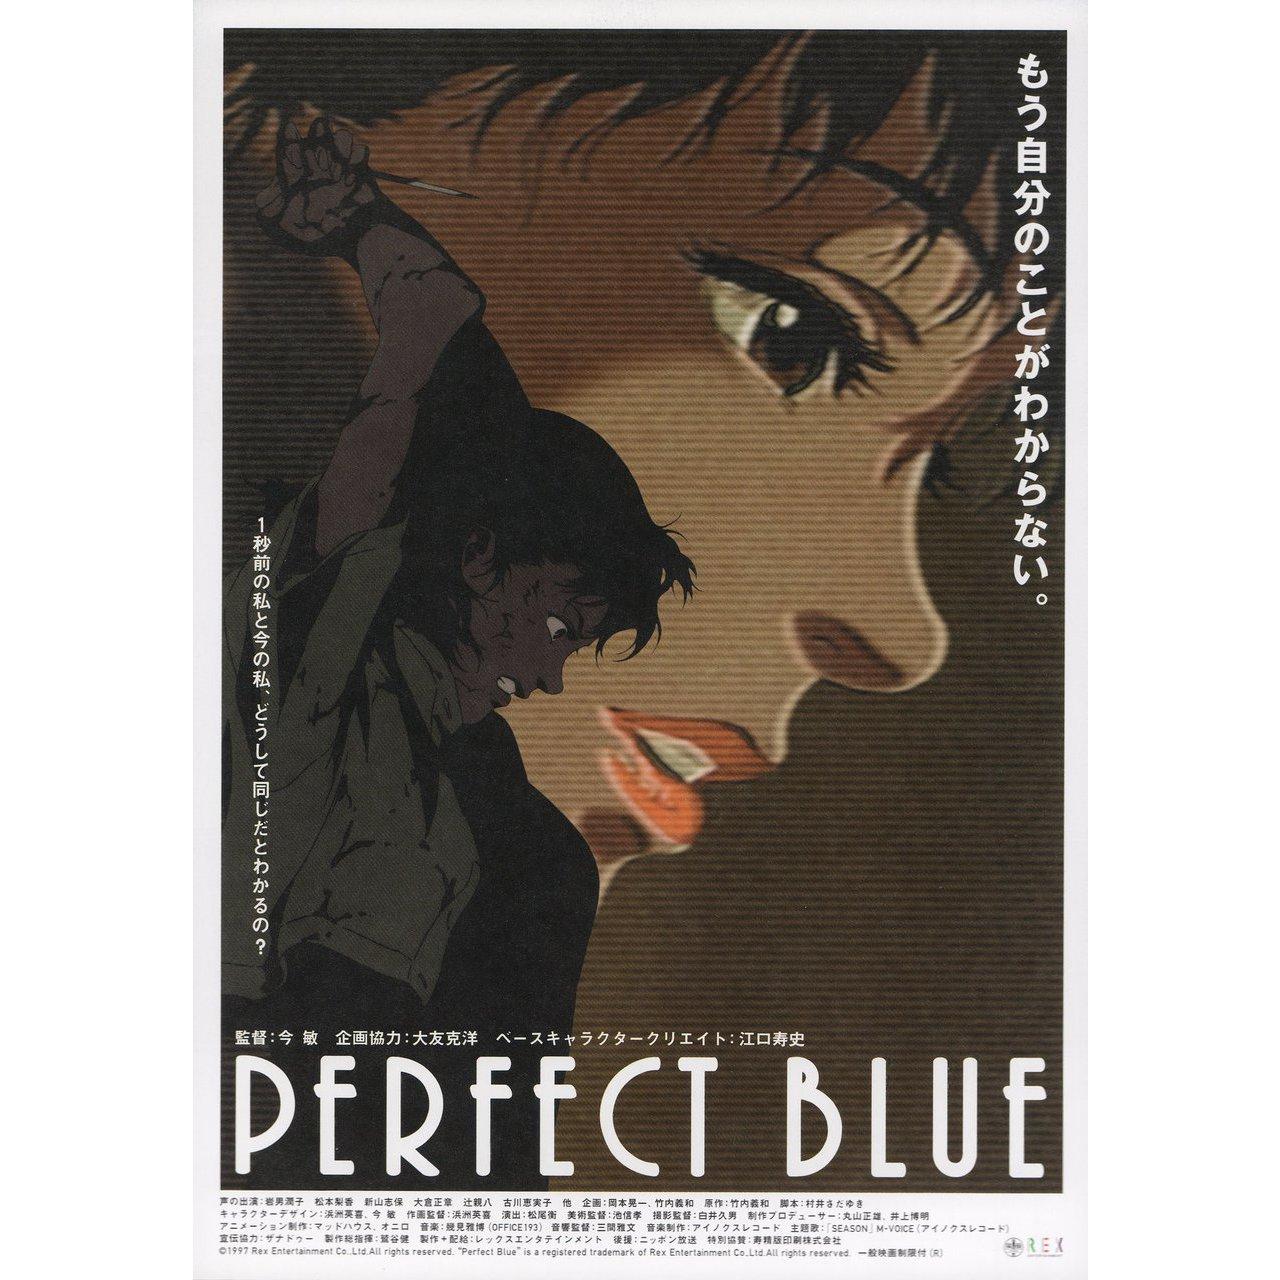 who directed perfect blue